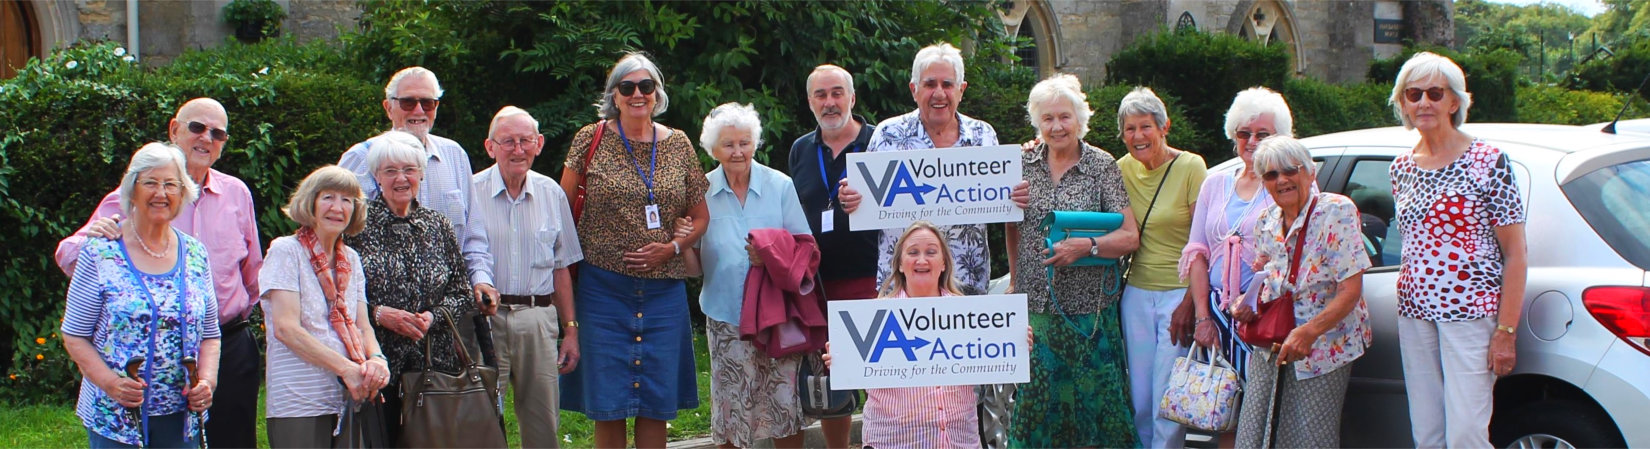 A group of volunteers from VA